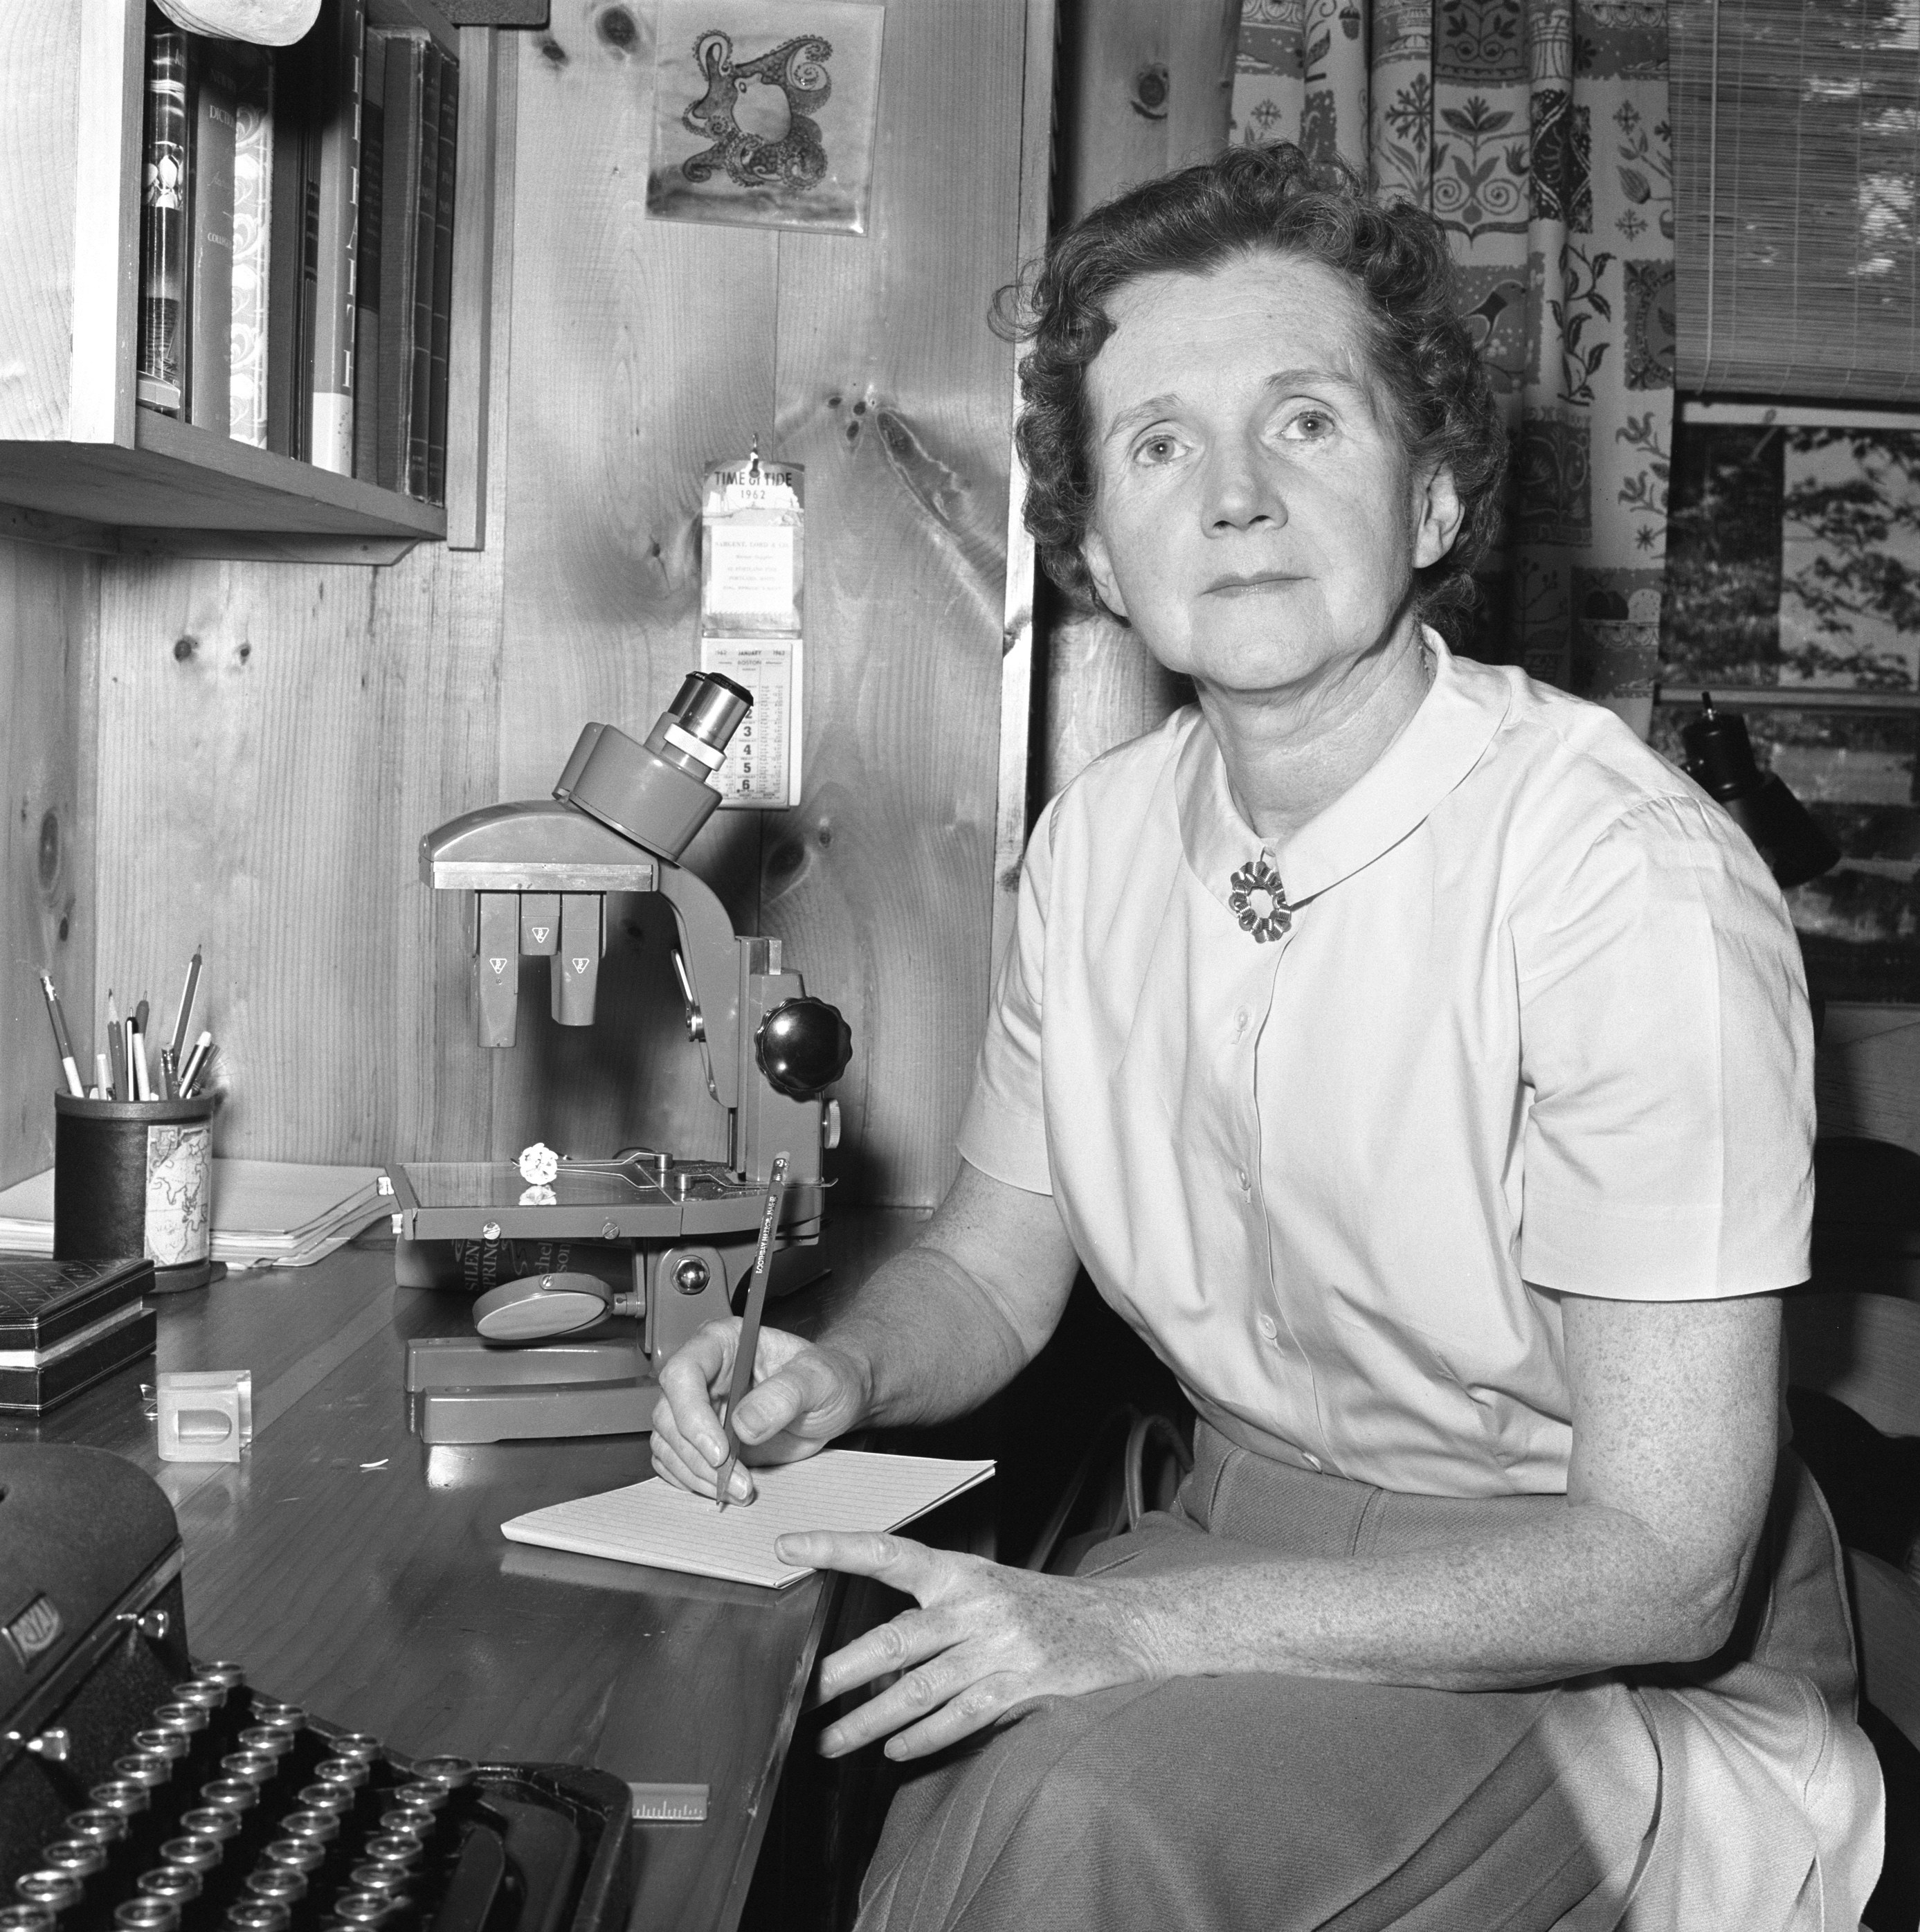 Rachel Carson at her summer home, writing on a piece of paper with a microscope and typewriter near her